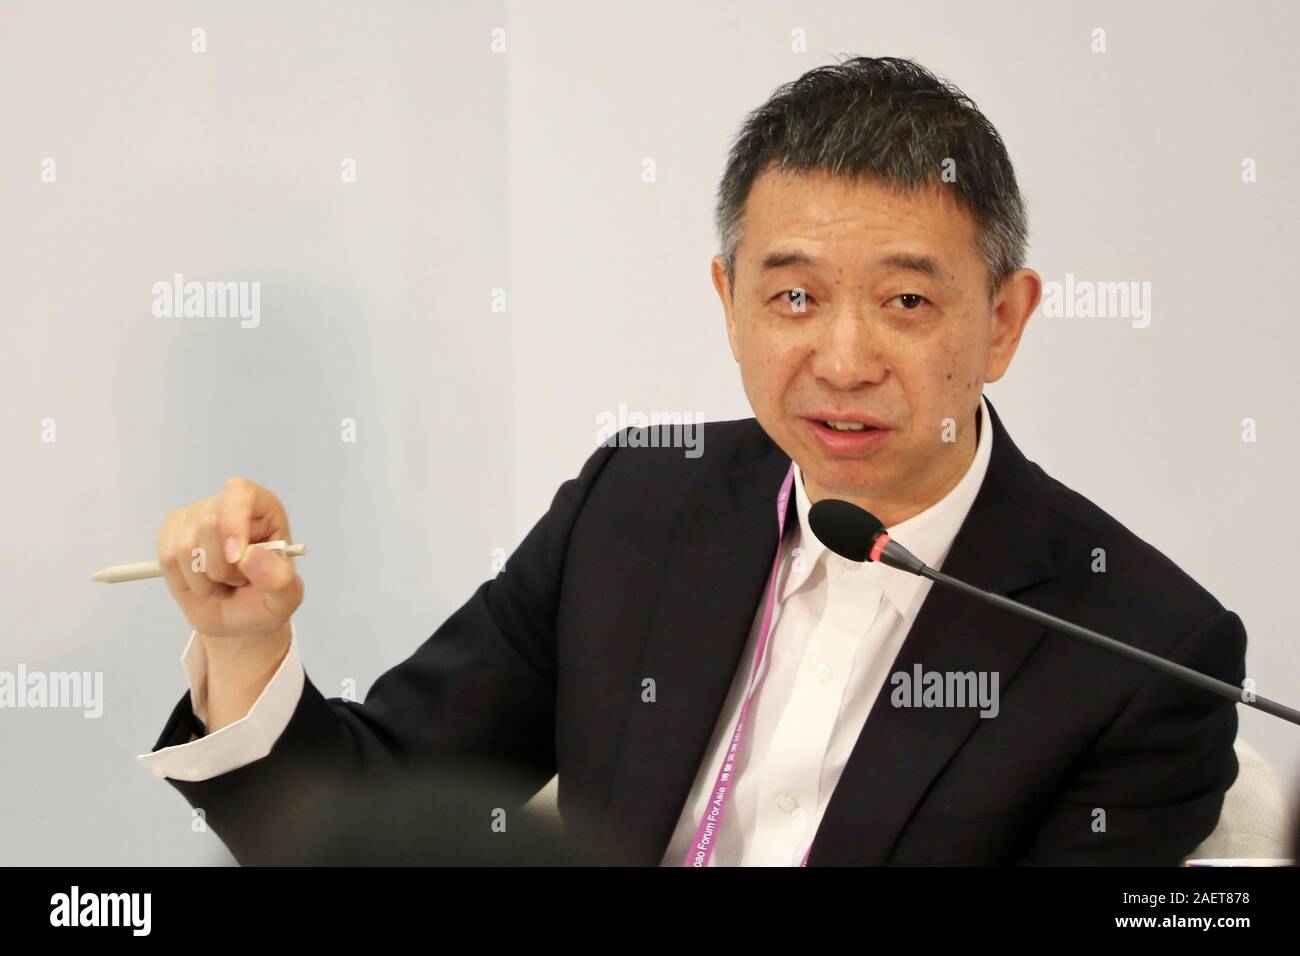 --FILE--Wang Jian, CTO of Chinese multinational conglomerate holding company Alibaba Group, delivers a speech at Boao Forum for Asia in Boao town, Qio Stock Photo